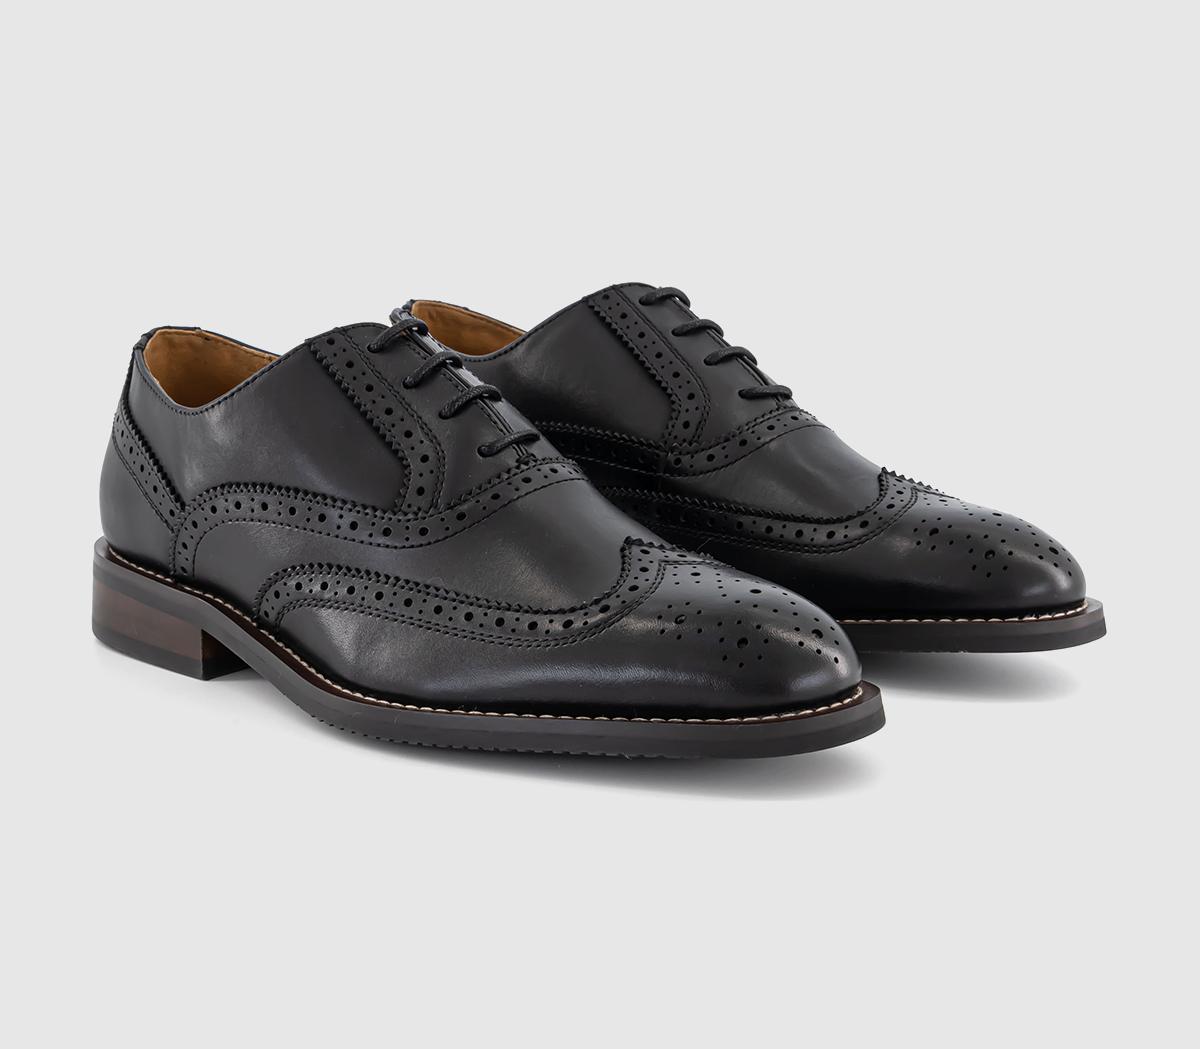 OFFICE Mens Mariner Wingcap Brogue Shoes Black Leather, 11